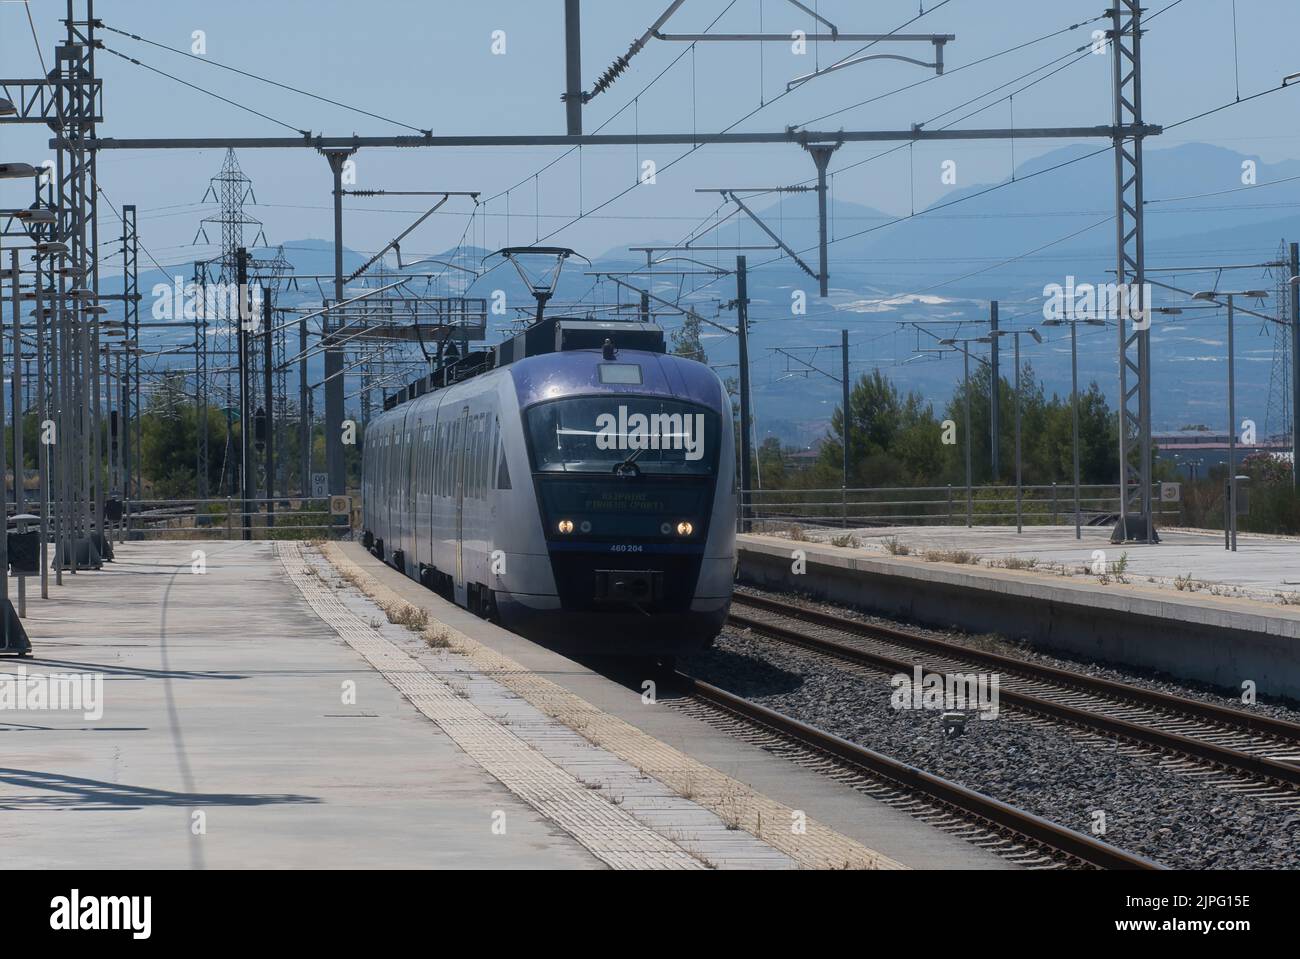 One of the few trains in Greece arriving at Corinth station in Summer Stock Photo